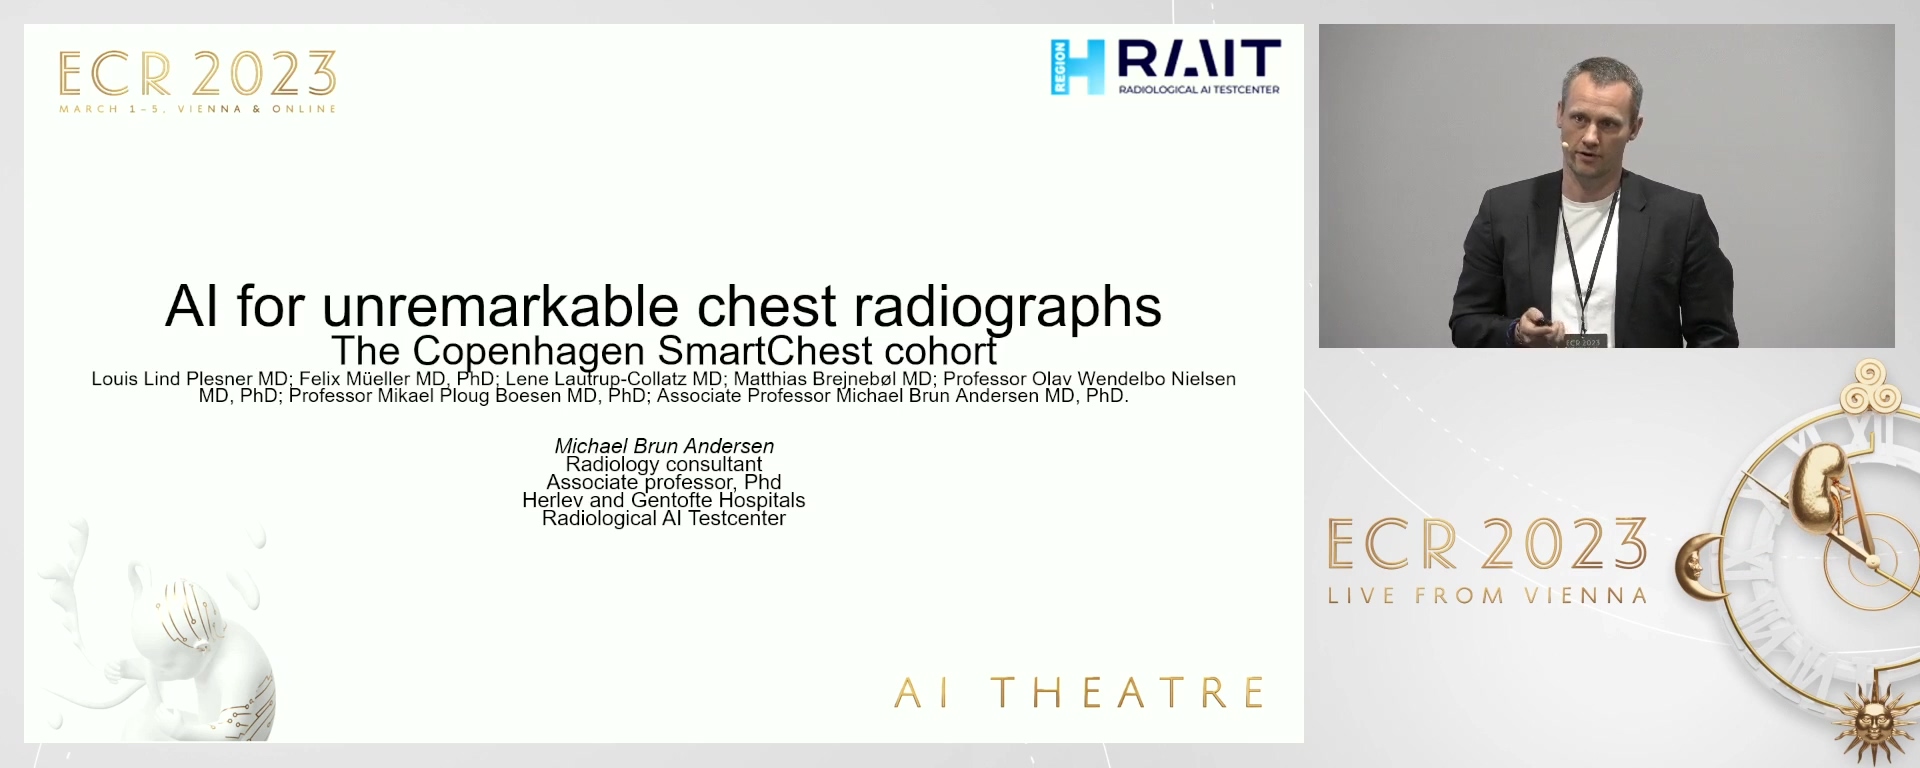 The Copenhagen Smartchest CXR cohort - preliminary results of AI validation on a consecutive real world dataset